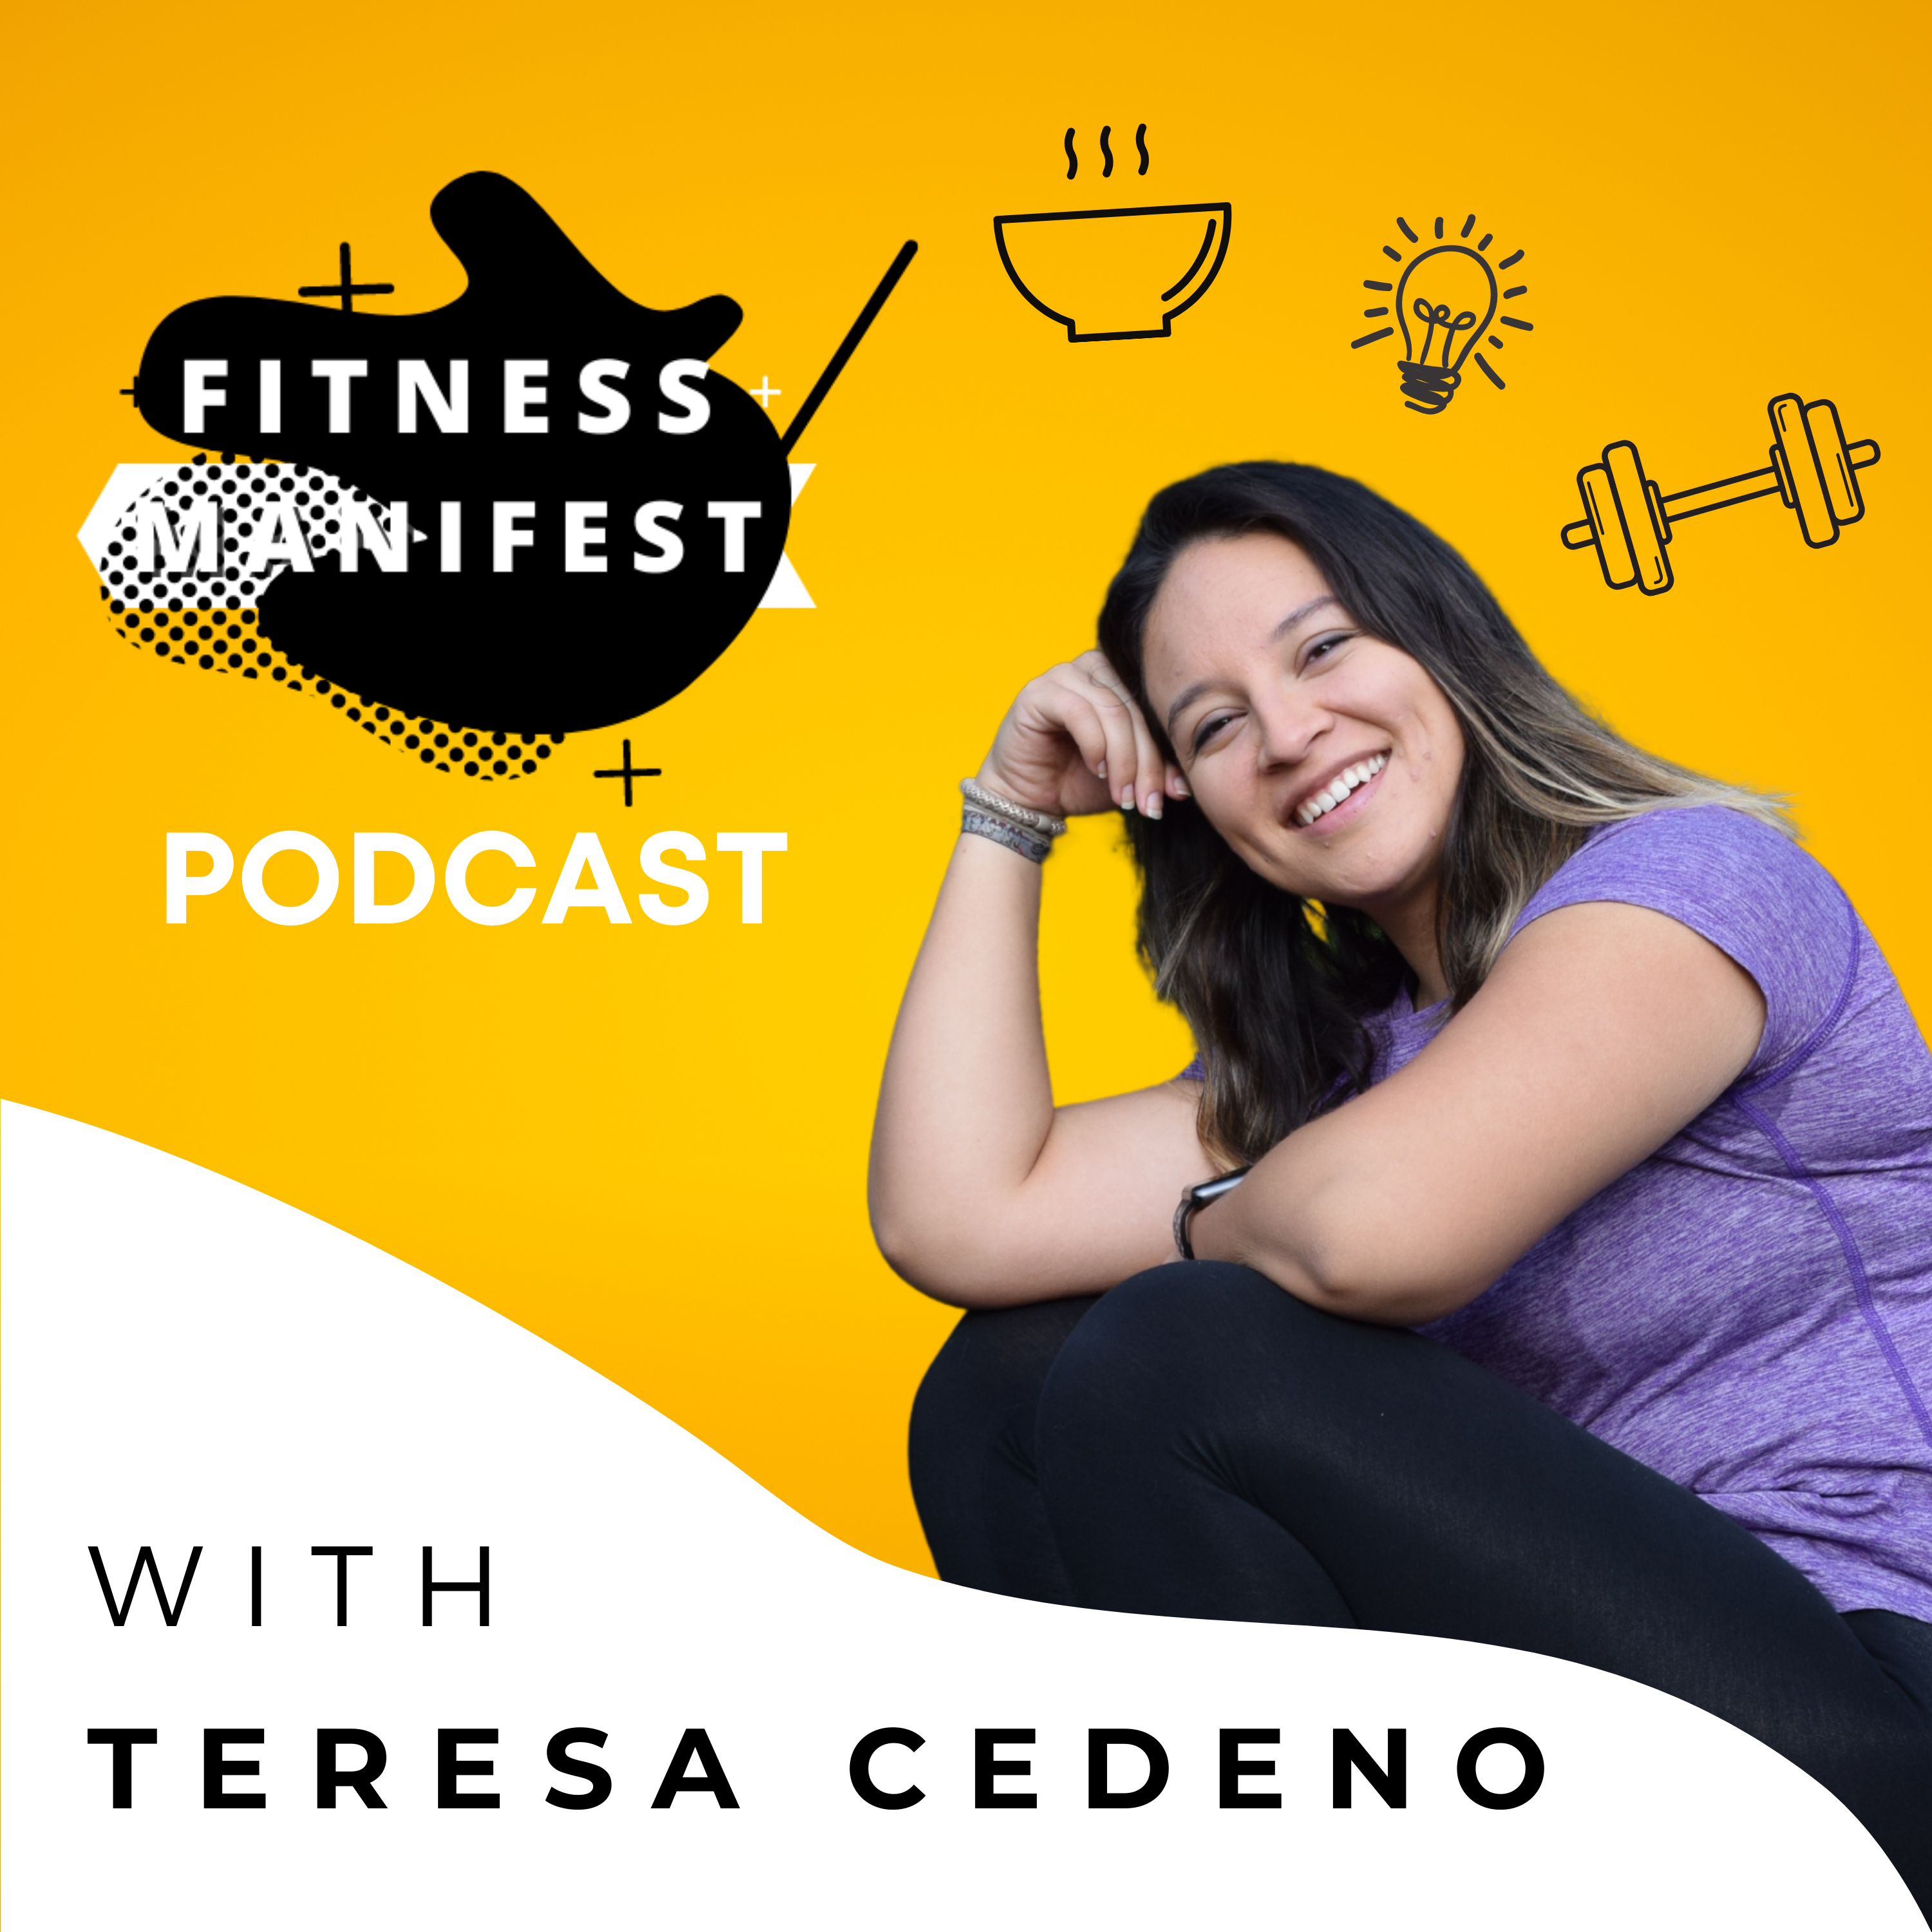 29. Dispel Health and Fitness Myths with Dr. Swart